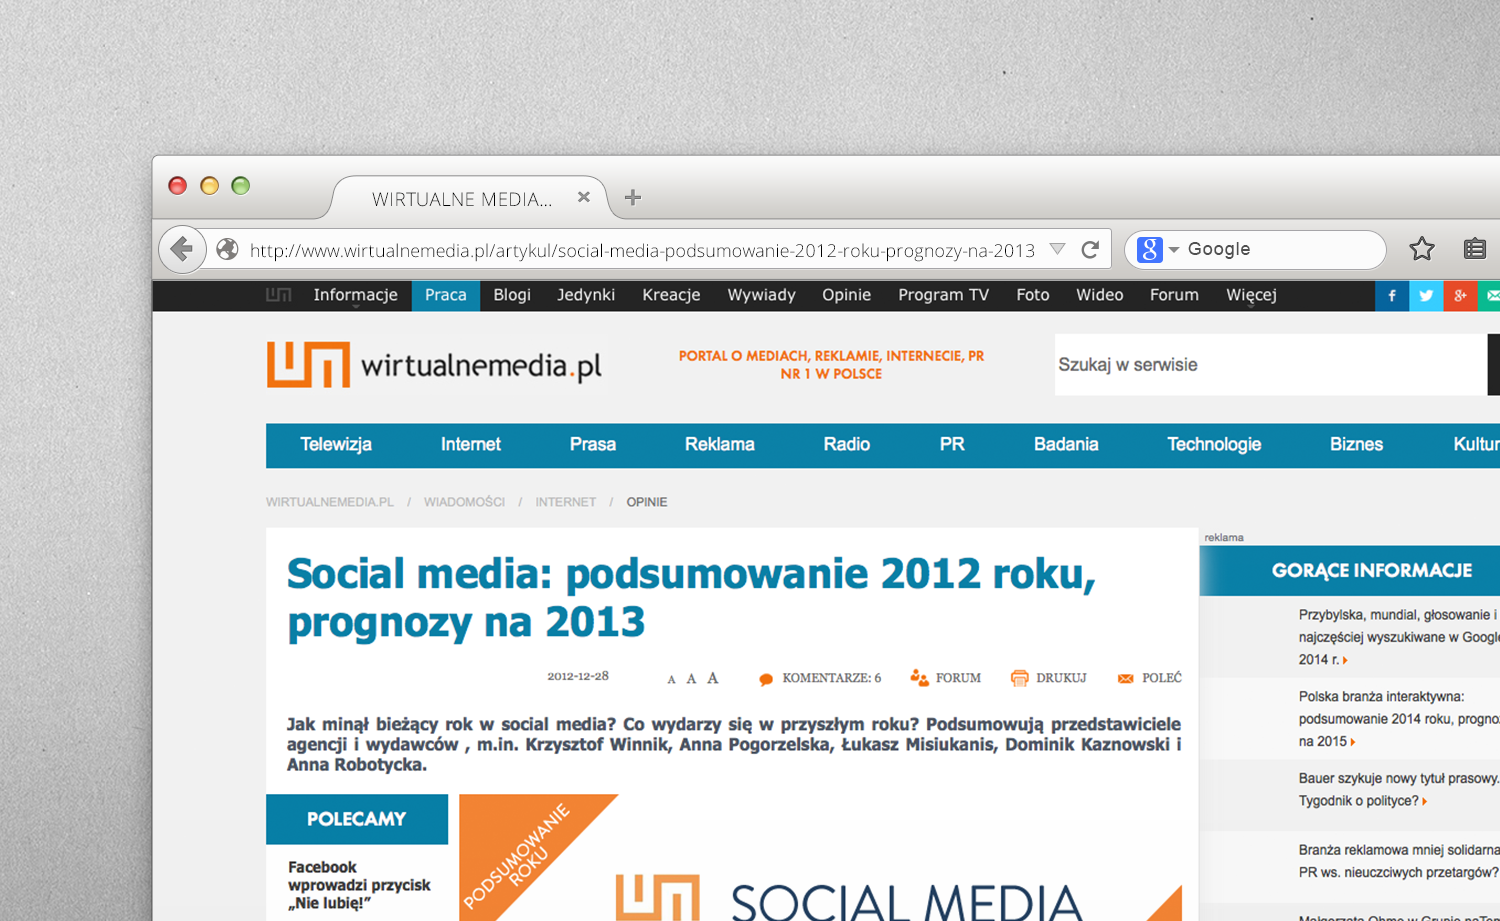 Wirtualnemedia.pl: summary of 2012 and forecasts for 2013